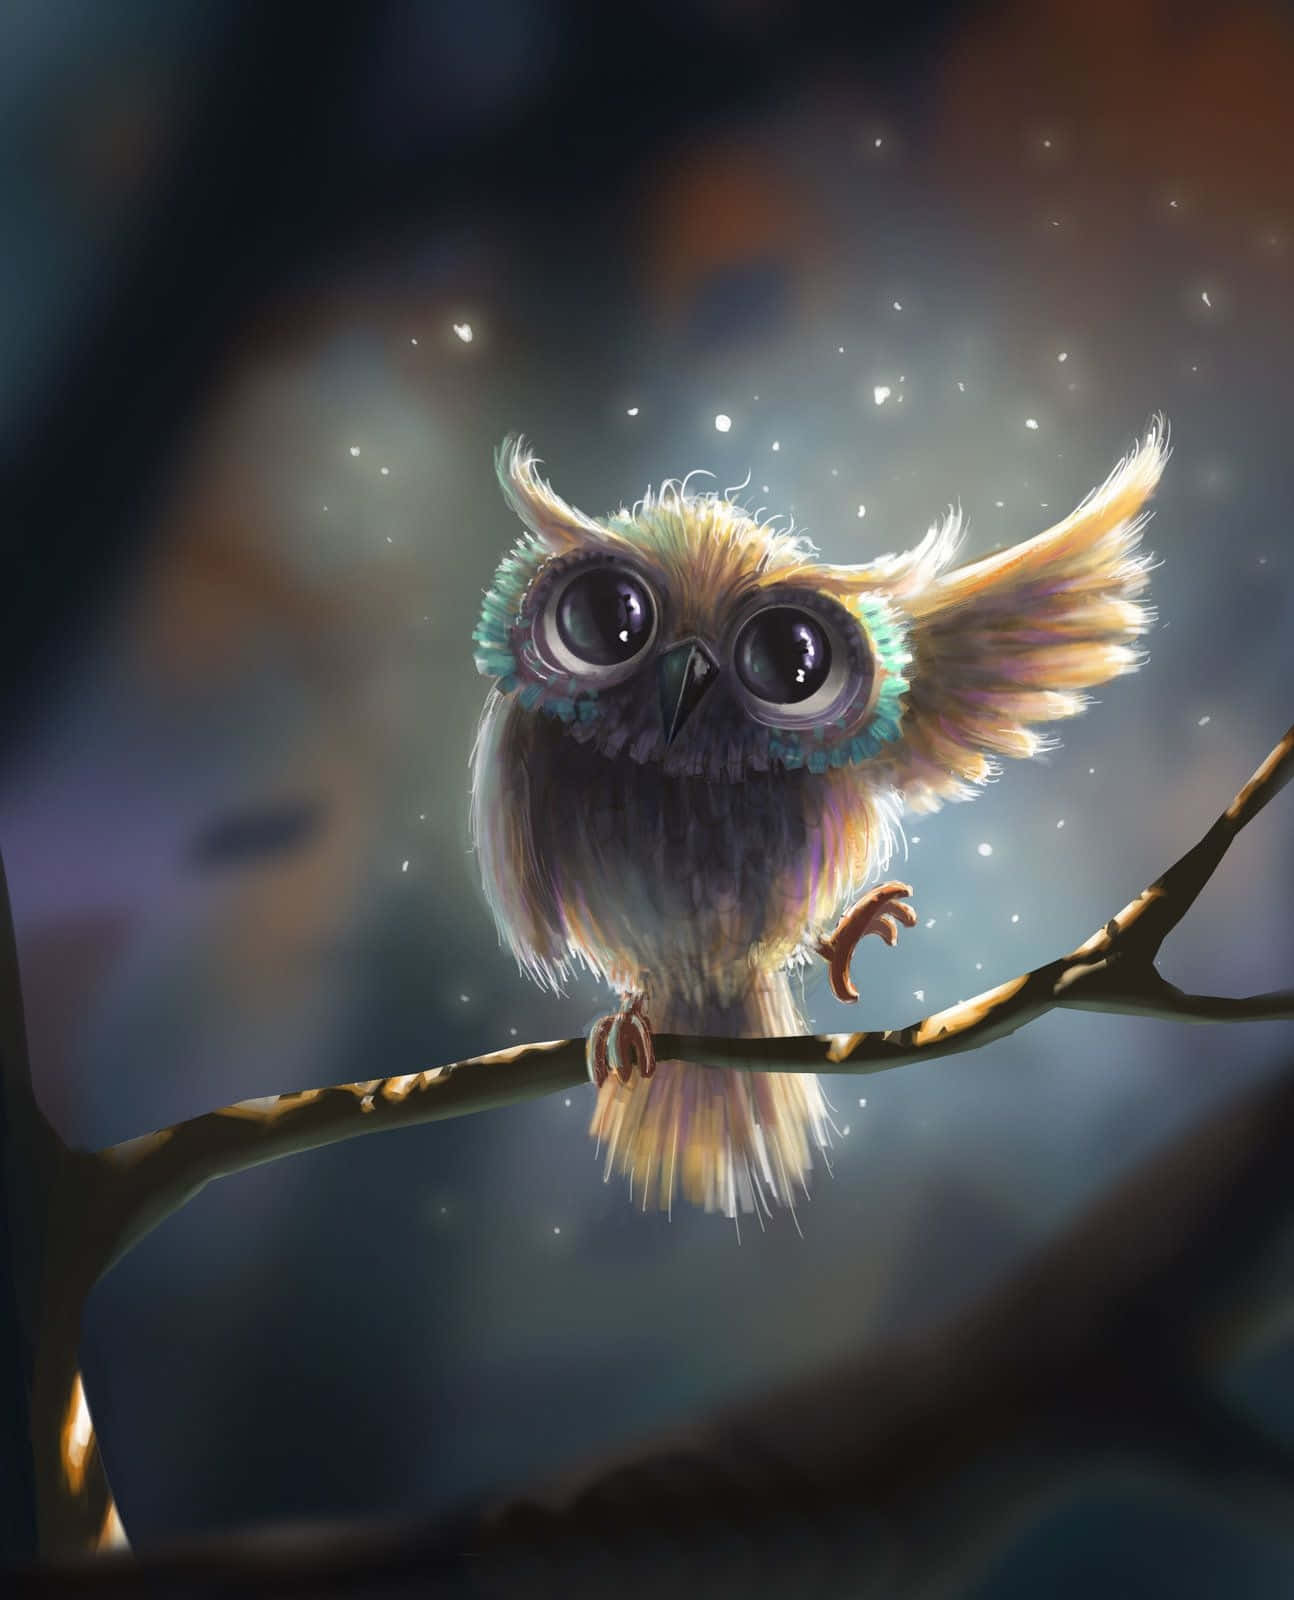 A Small Owl Sitting On A Branch In The Forest Wallpaper